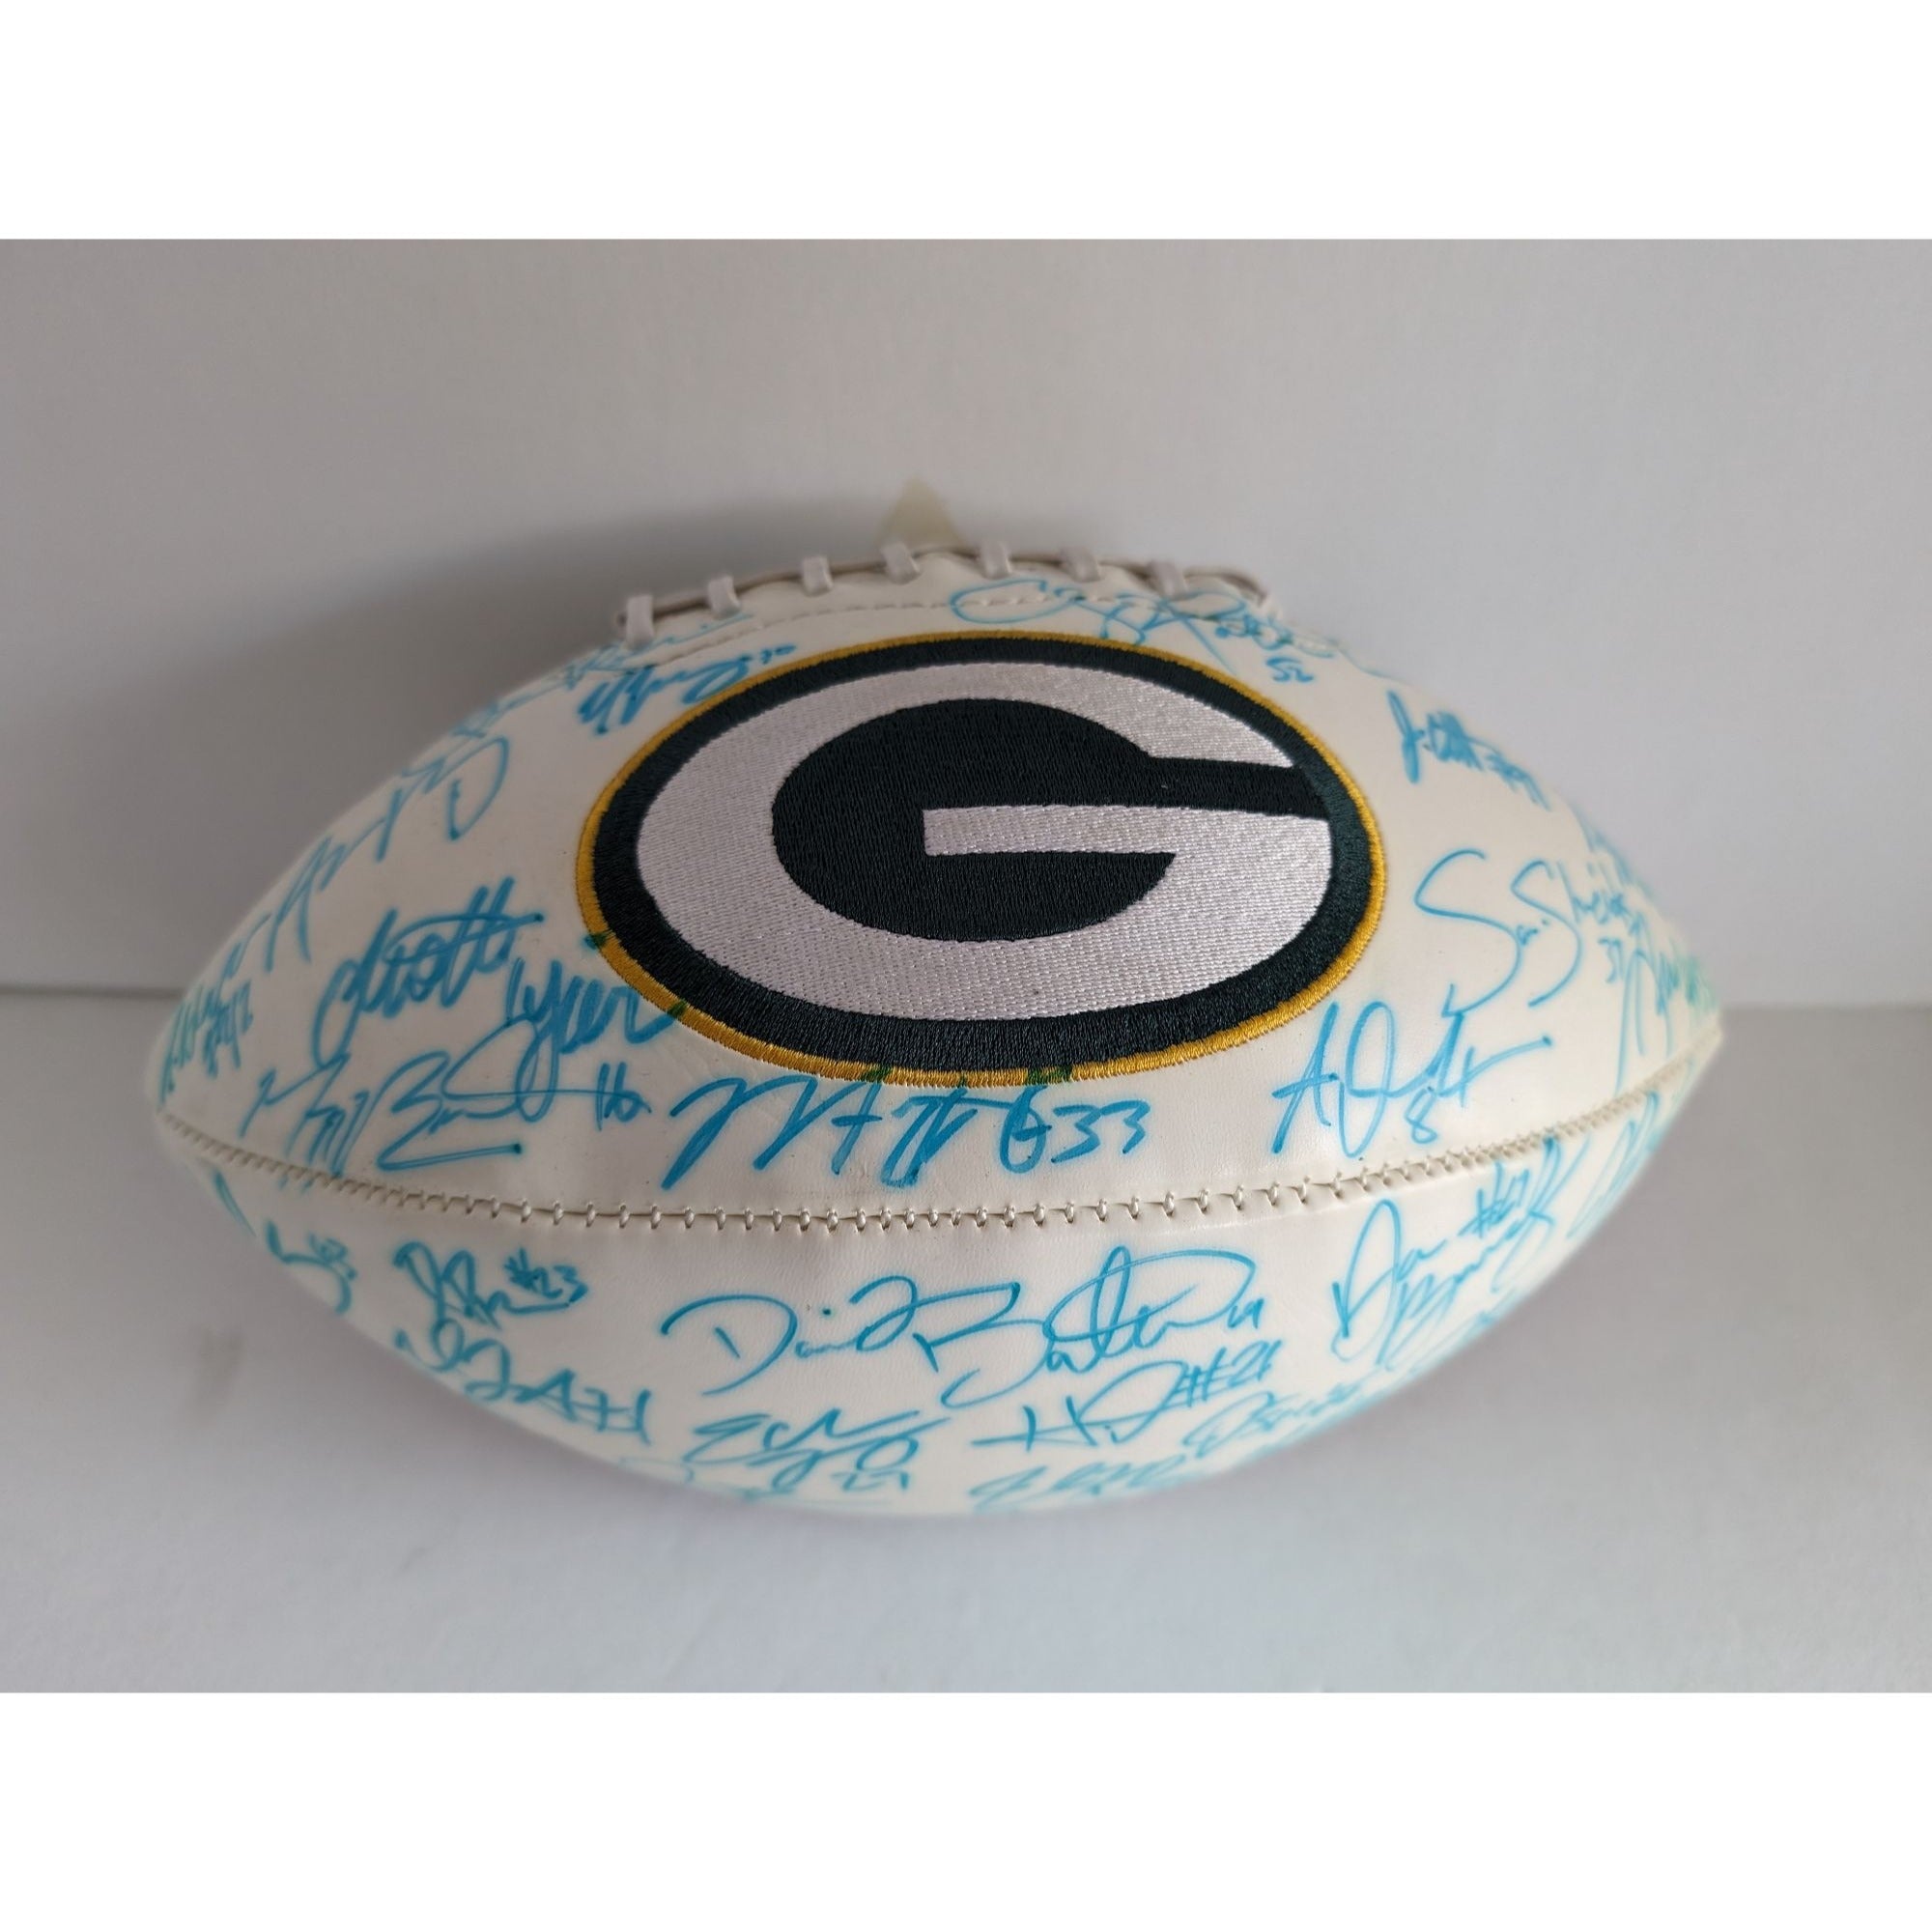 Green Bay Packers Aaron Rodgers Clay Matthews team signed football